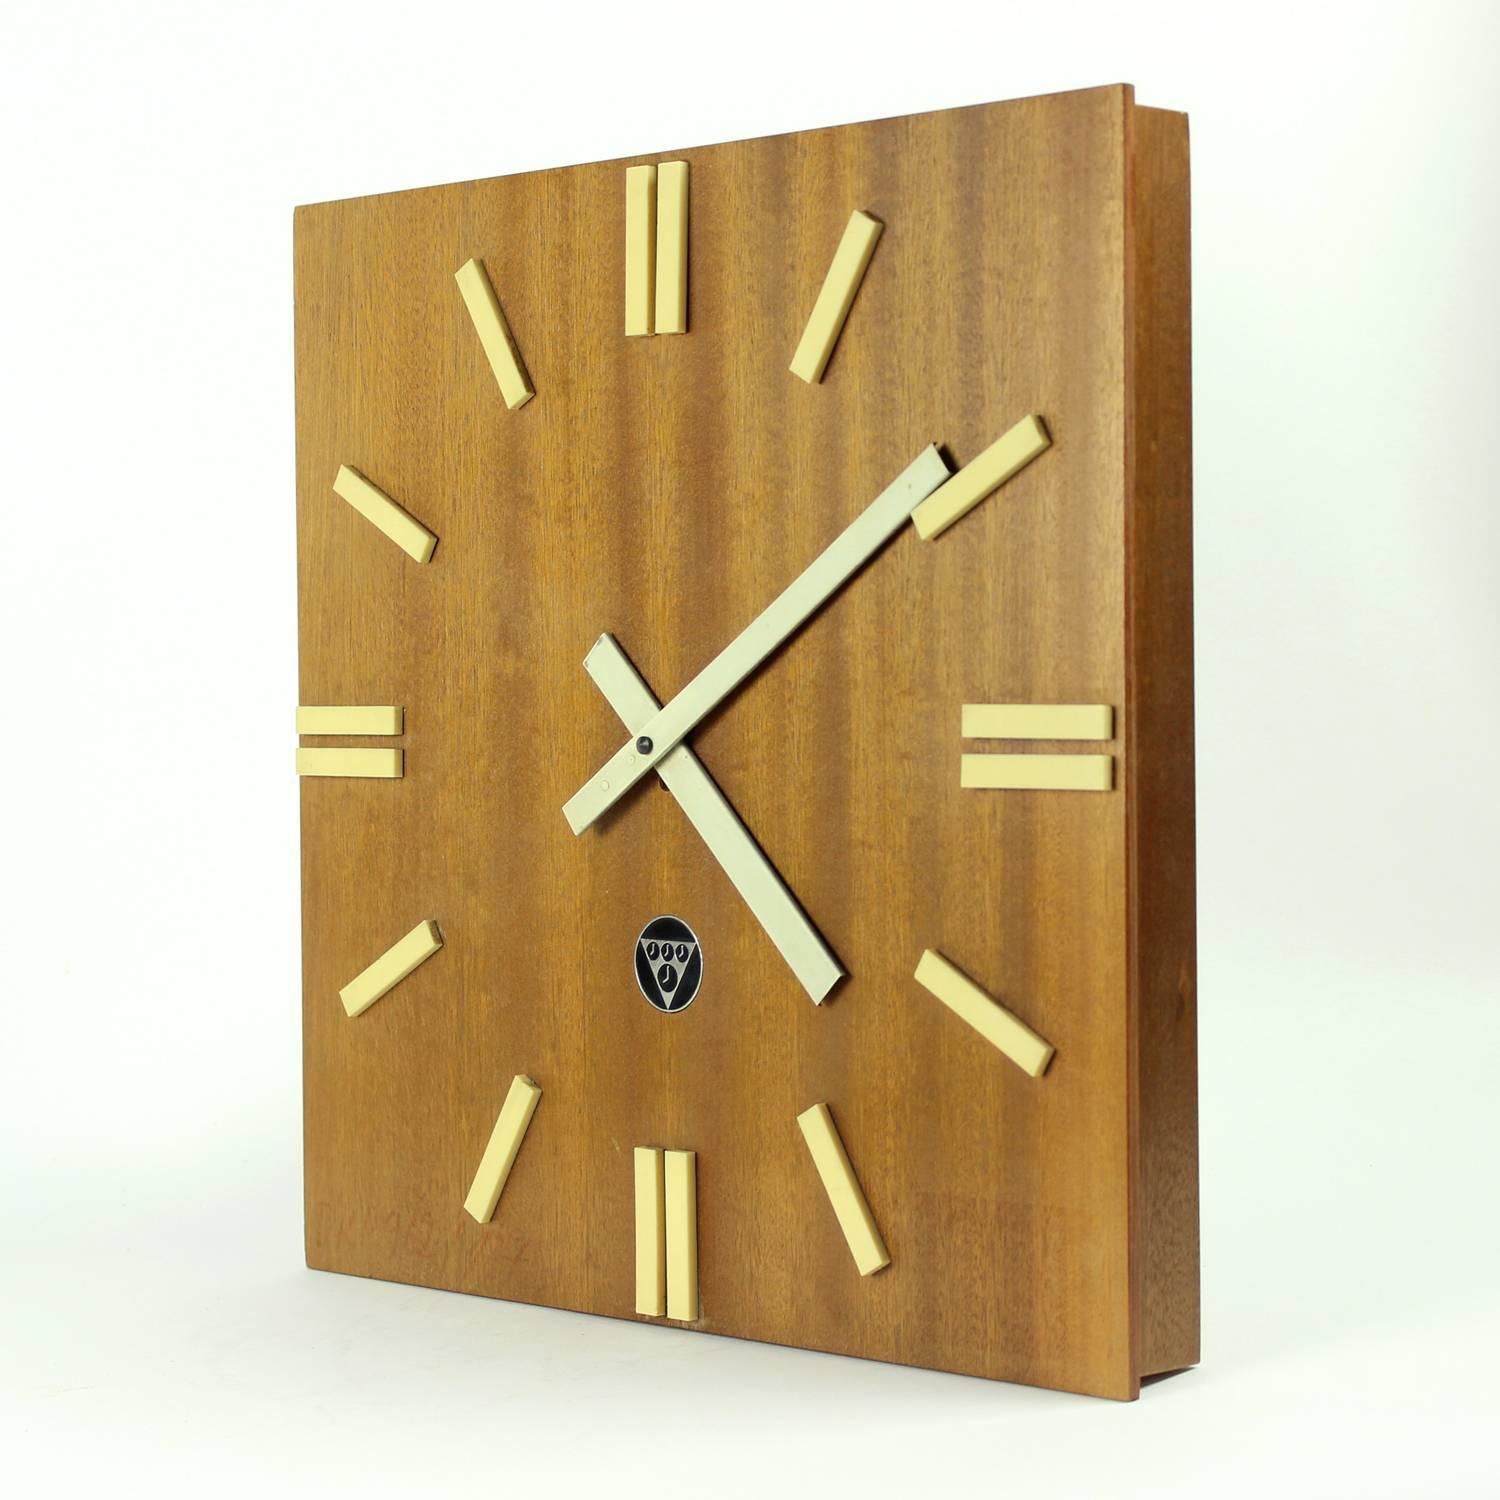 This beautiful large wooden wall clock looks amazing on a wall. Created as a interior edition of Pragotron clock, ment for public places like restaurants or offices in Czechoslovakia in 1980s. Square clock is made of plywood with mahagony veneer.